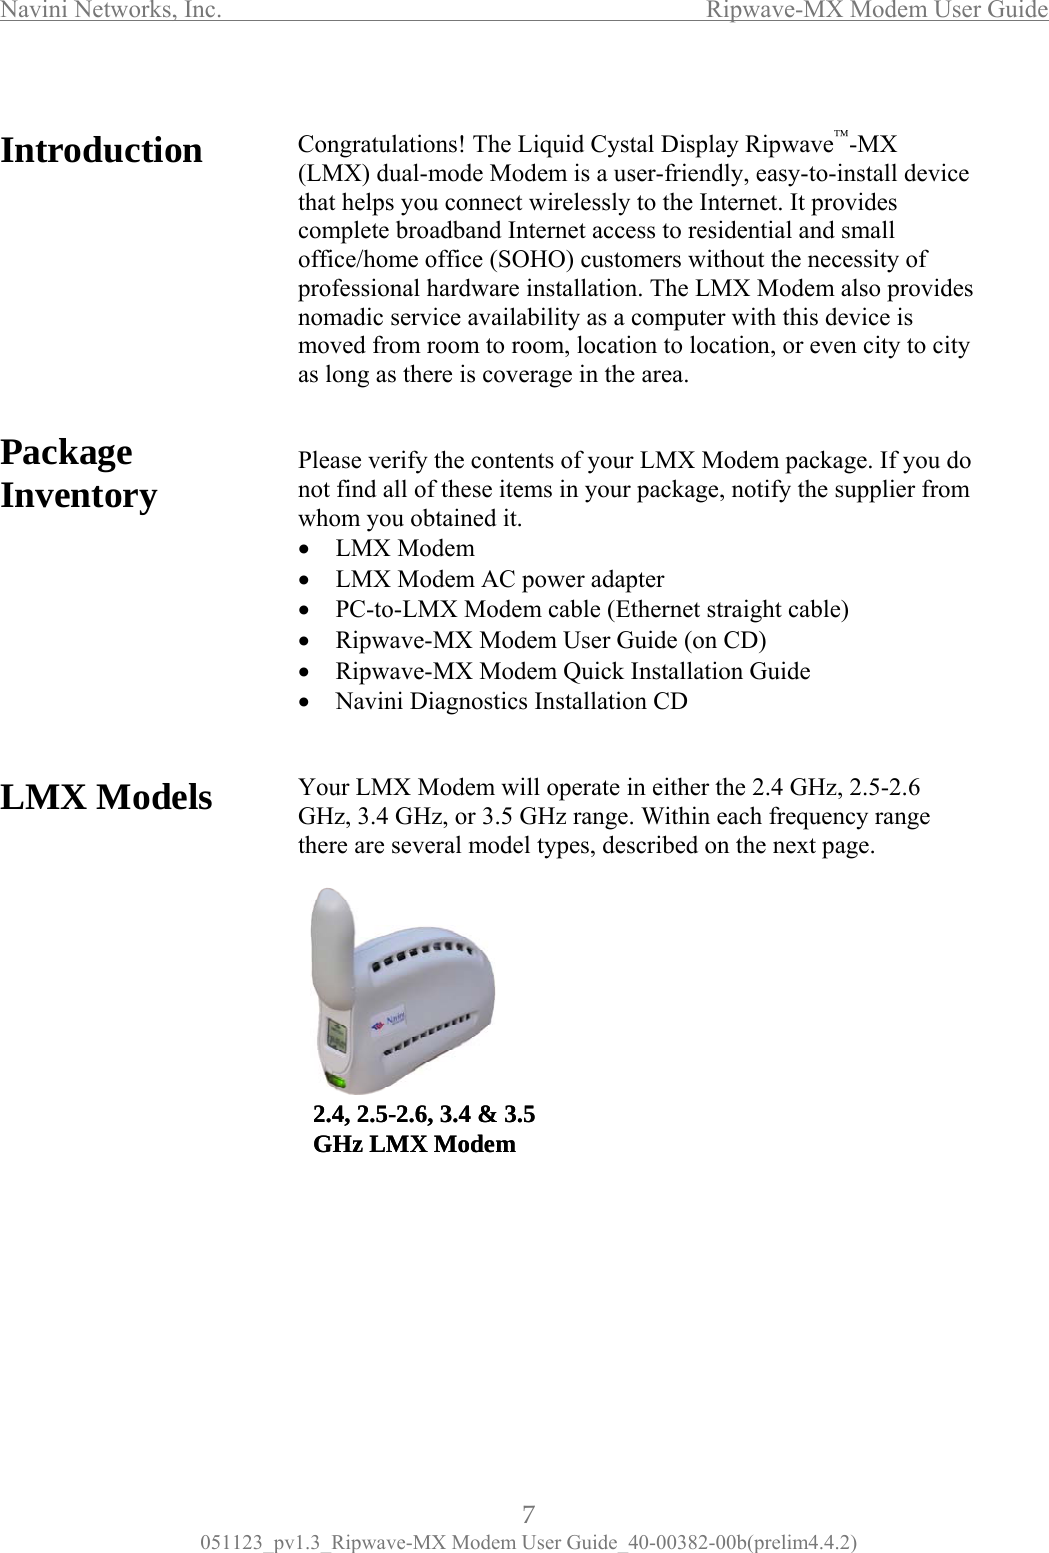 Navini Networks, Inc.                  Ripwave-MX Modem User Guide  Intro    Package Inventory          LMX Models                      that helps you connect wirelessly to the Internet. It provides complete broadband Internet access to residential and small office/home office (SOHO) customers without the necessity of professional hardware installation. The LMX Modem also provides nomadic service availability as a computer with this device is moved from room to room, location to location, or even city to city as long as there is coverage in the area.   Please verify the contents of your LMX Modem package. If you do not find all of these items in your package, notify the supplier from whom you obtained it. •  LMX Modem •  LMX Modem AC power adapter •  PC-to-LMX Modem cable (Ethernet straight cable) •  Ripwave-MX Modem User Guide (on CD) •  Ripwave-MX Modem Quick Installation Guide •  Navini Diagnostics Installation CD   Your LMX Modem will operate in either the 2.4 GHz, 2.5-2.6 GHz, 3.4 GHz, or 3.5 GHz range. Within each frequency range there are several model types, described on the next page.           duction  Congratulations! The Liquid Cystal Display Ripwave™-MX (LMX) dual-mode Modem is a user-friendly, easy-to-install device       2.4, 2.5-2.6, 3.4 &amp; 3.5 GHz LMX Modem2.4, 2.5-2.6, 3.4 &amp; 3.5 GHz LMX Modem7 051123_pv1.3_Ripwave-MX Modem User Guide_40-00382-00b(prelim4.4.2) 